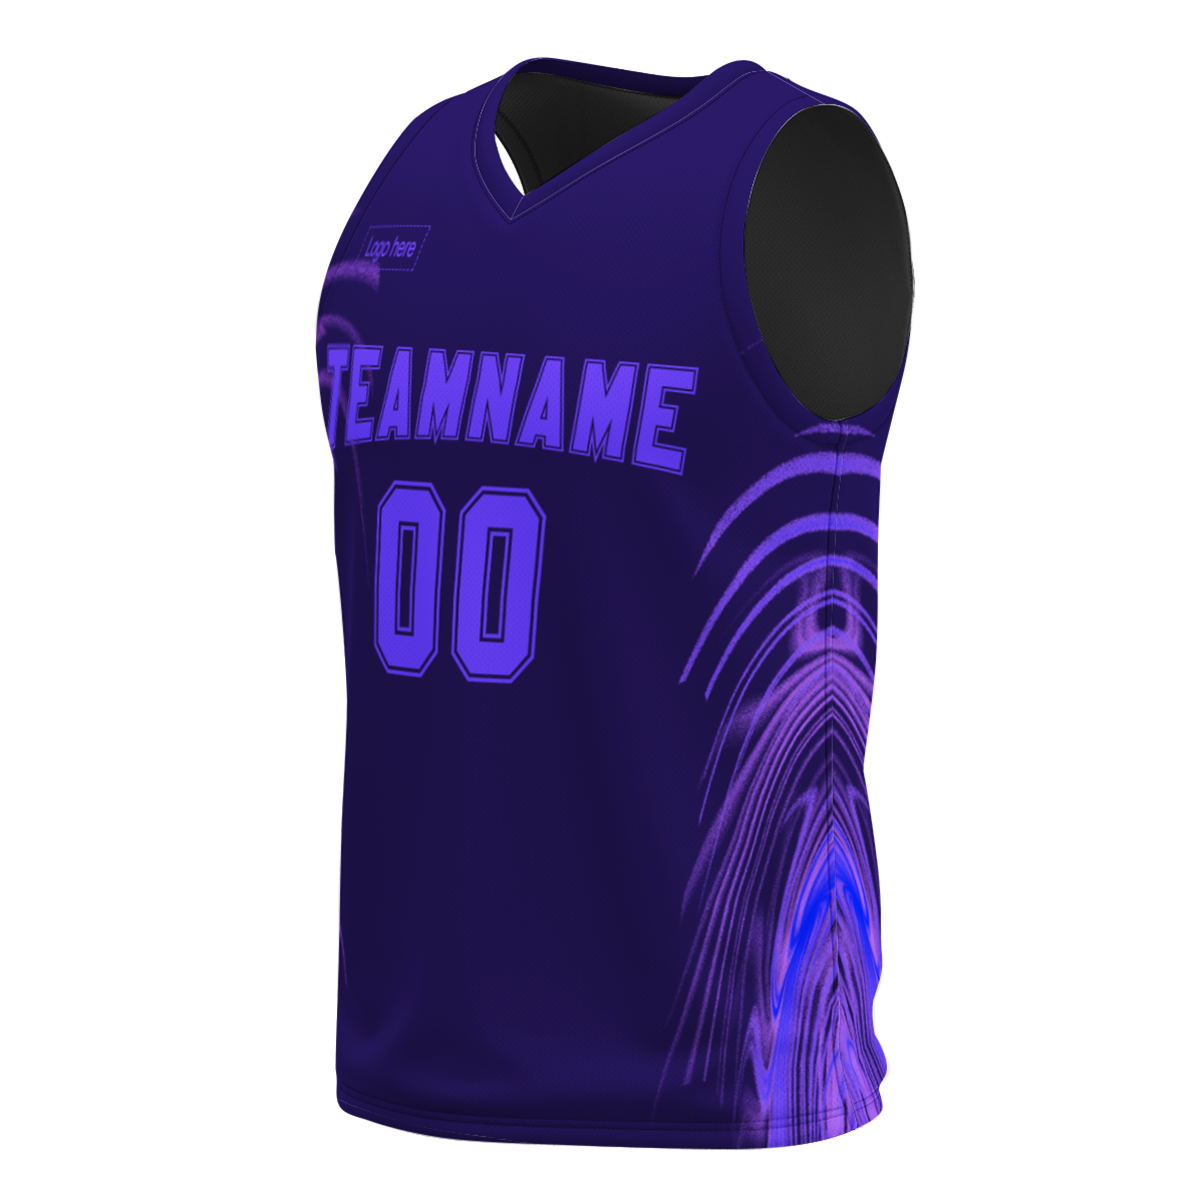 wholesale-polyester-breathable-sublimation-multiple-design-printed-basketball-jersey-uniforms-at-cj-pod-5